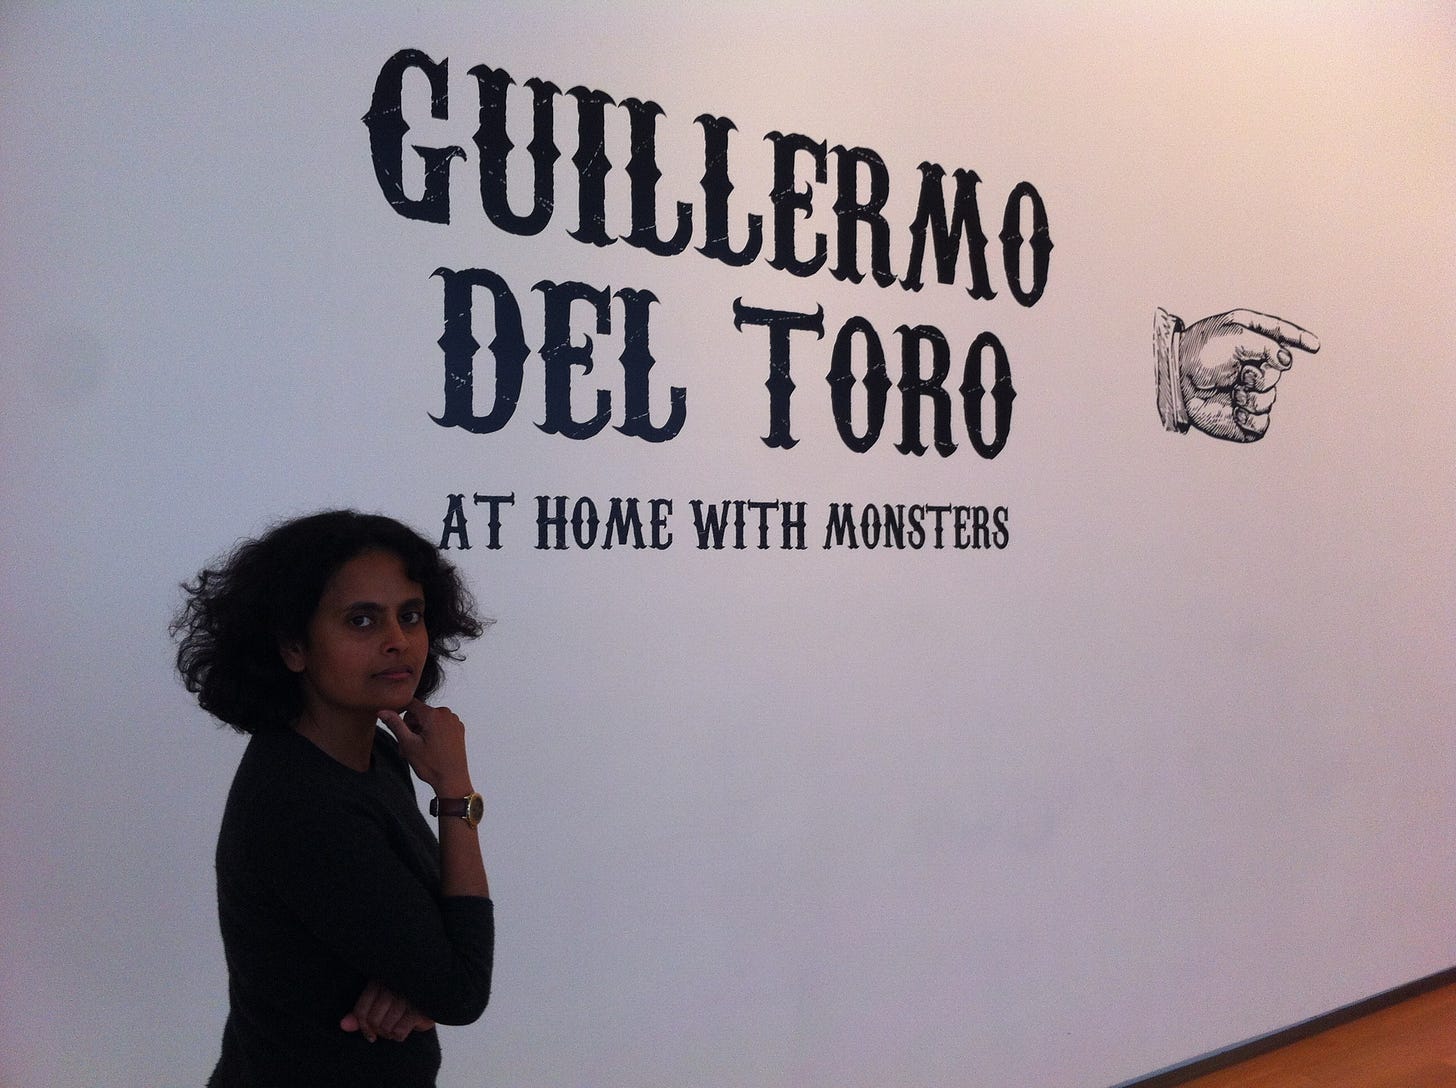 Me standing in front of a wall-sign: “Guillermo del Toro: At Home with Monsters.”